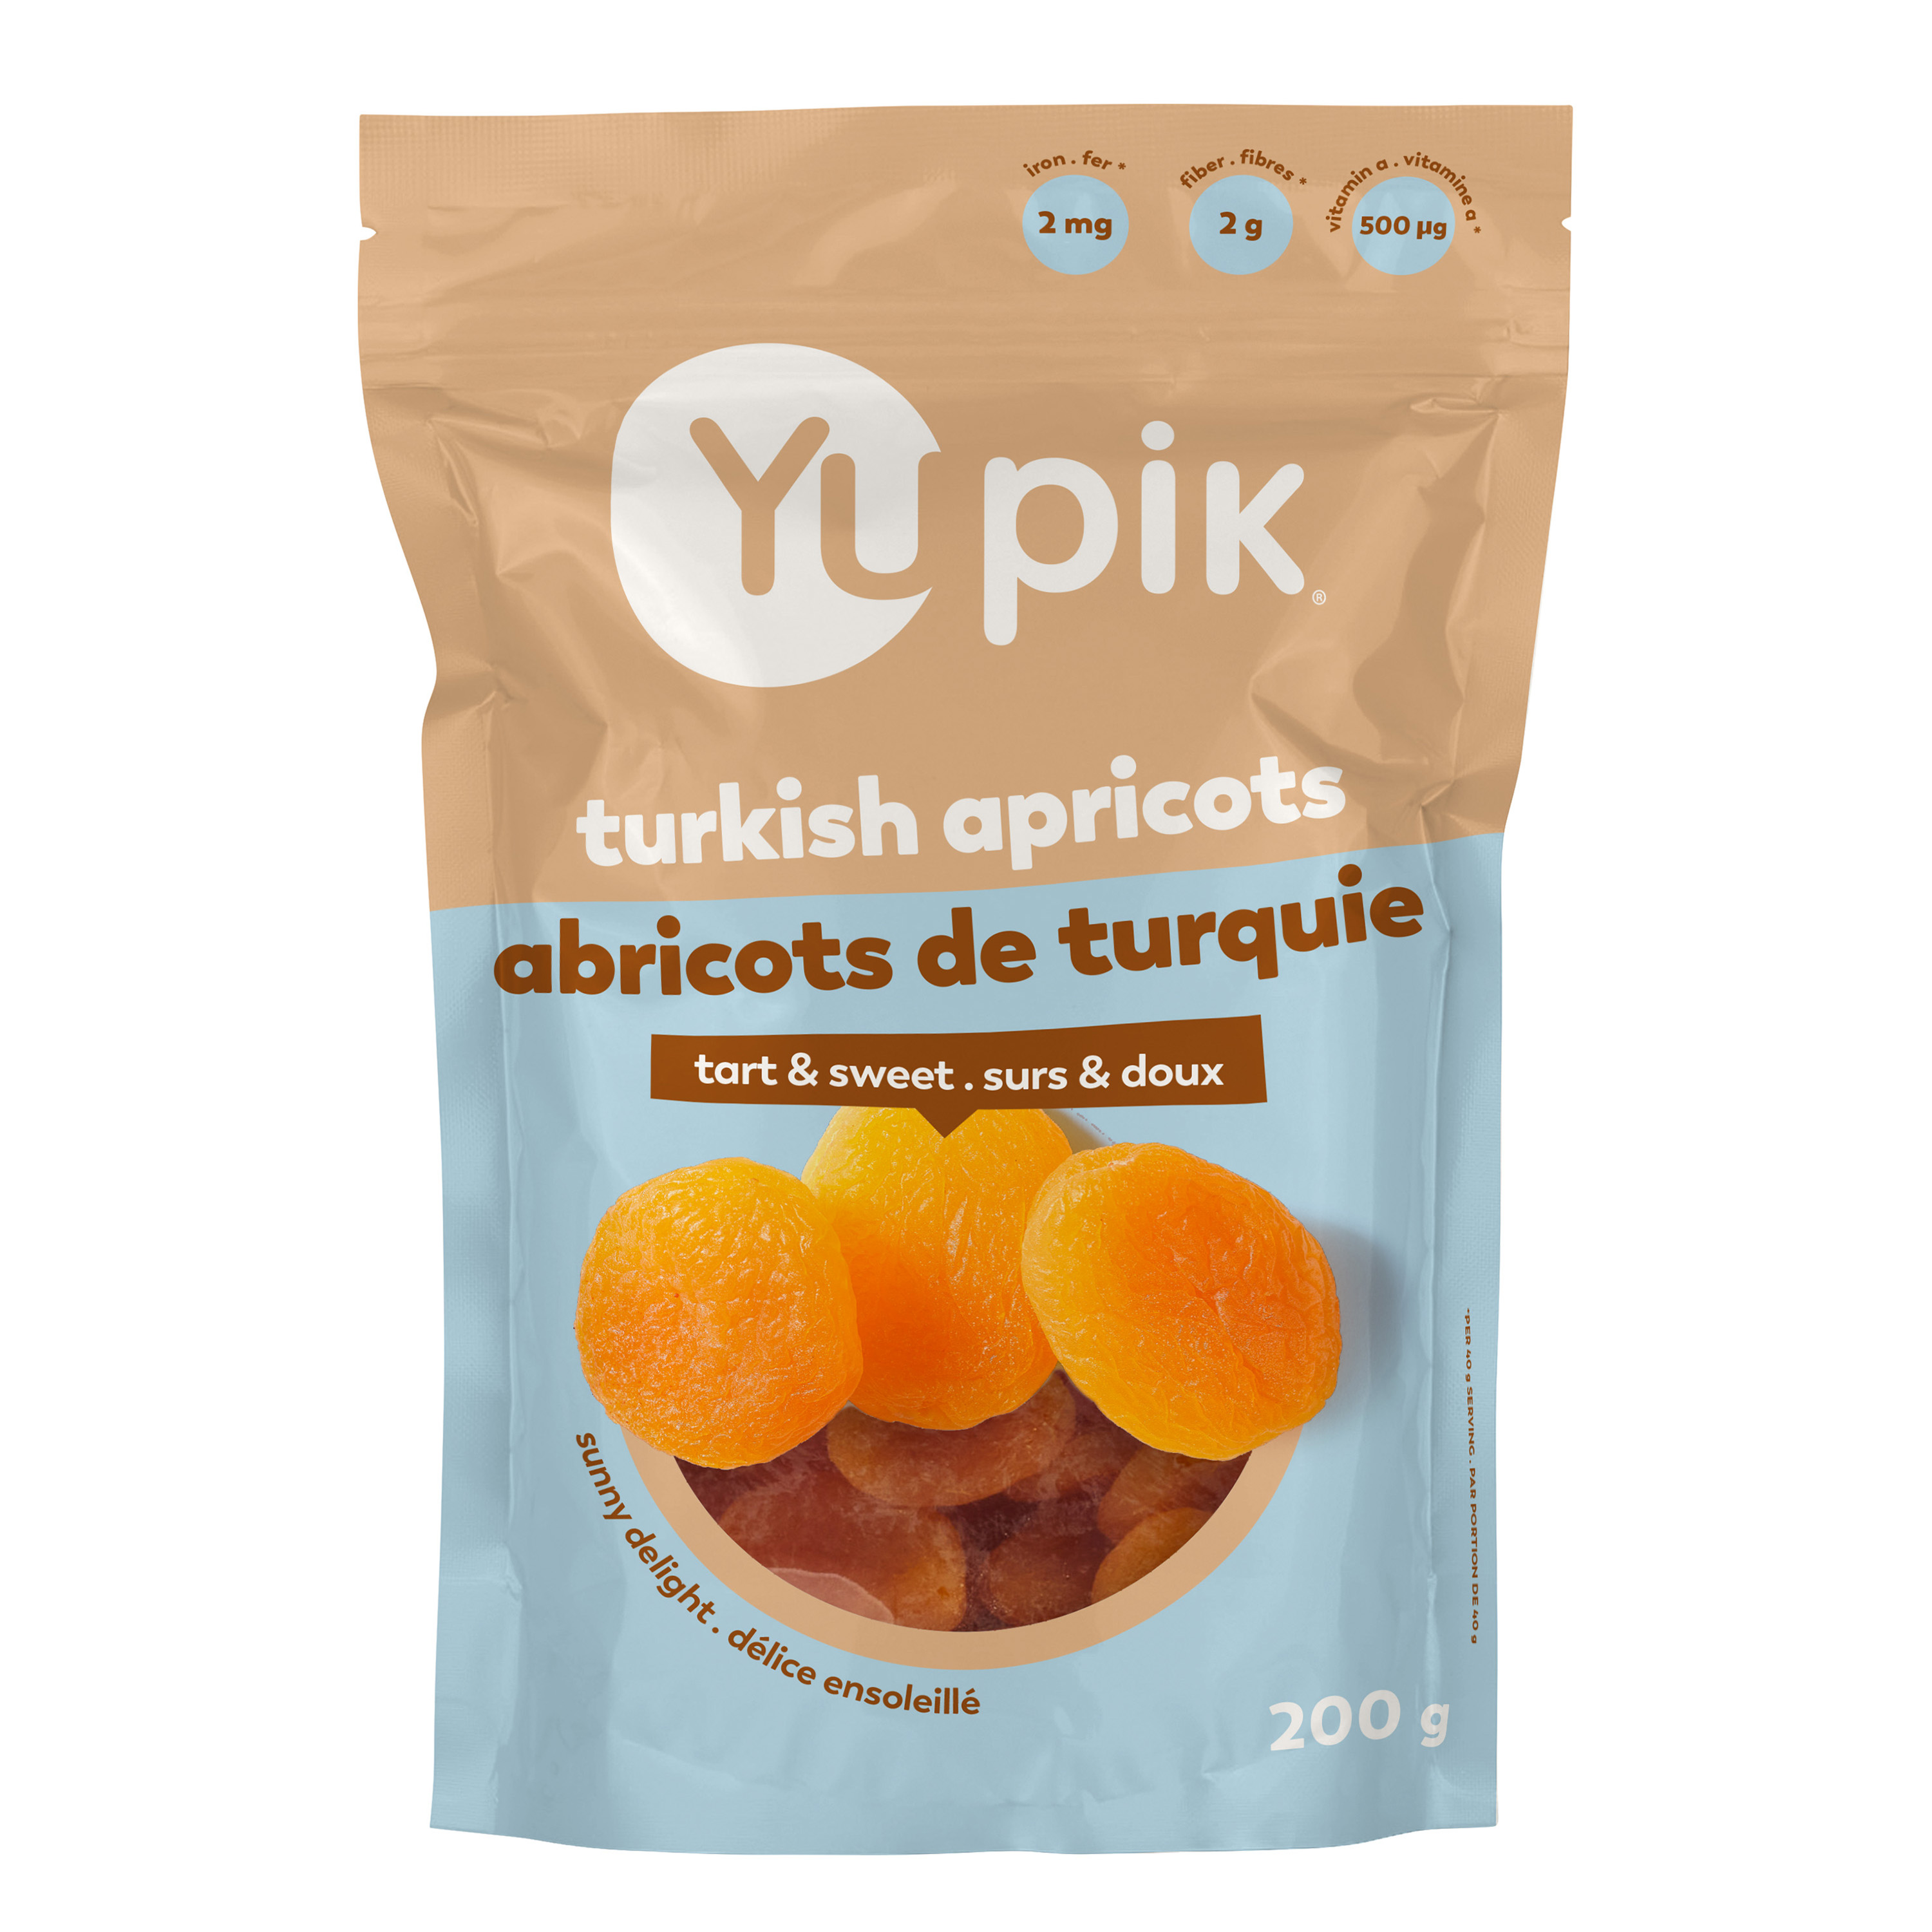 Apricots, sulphites.
This product may occasionally contain pits or pit fragments